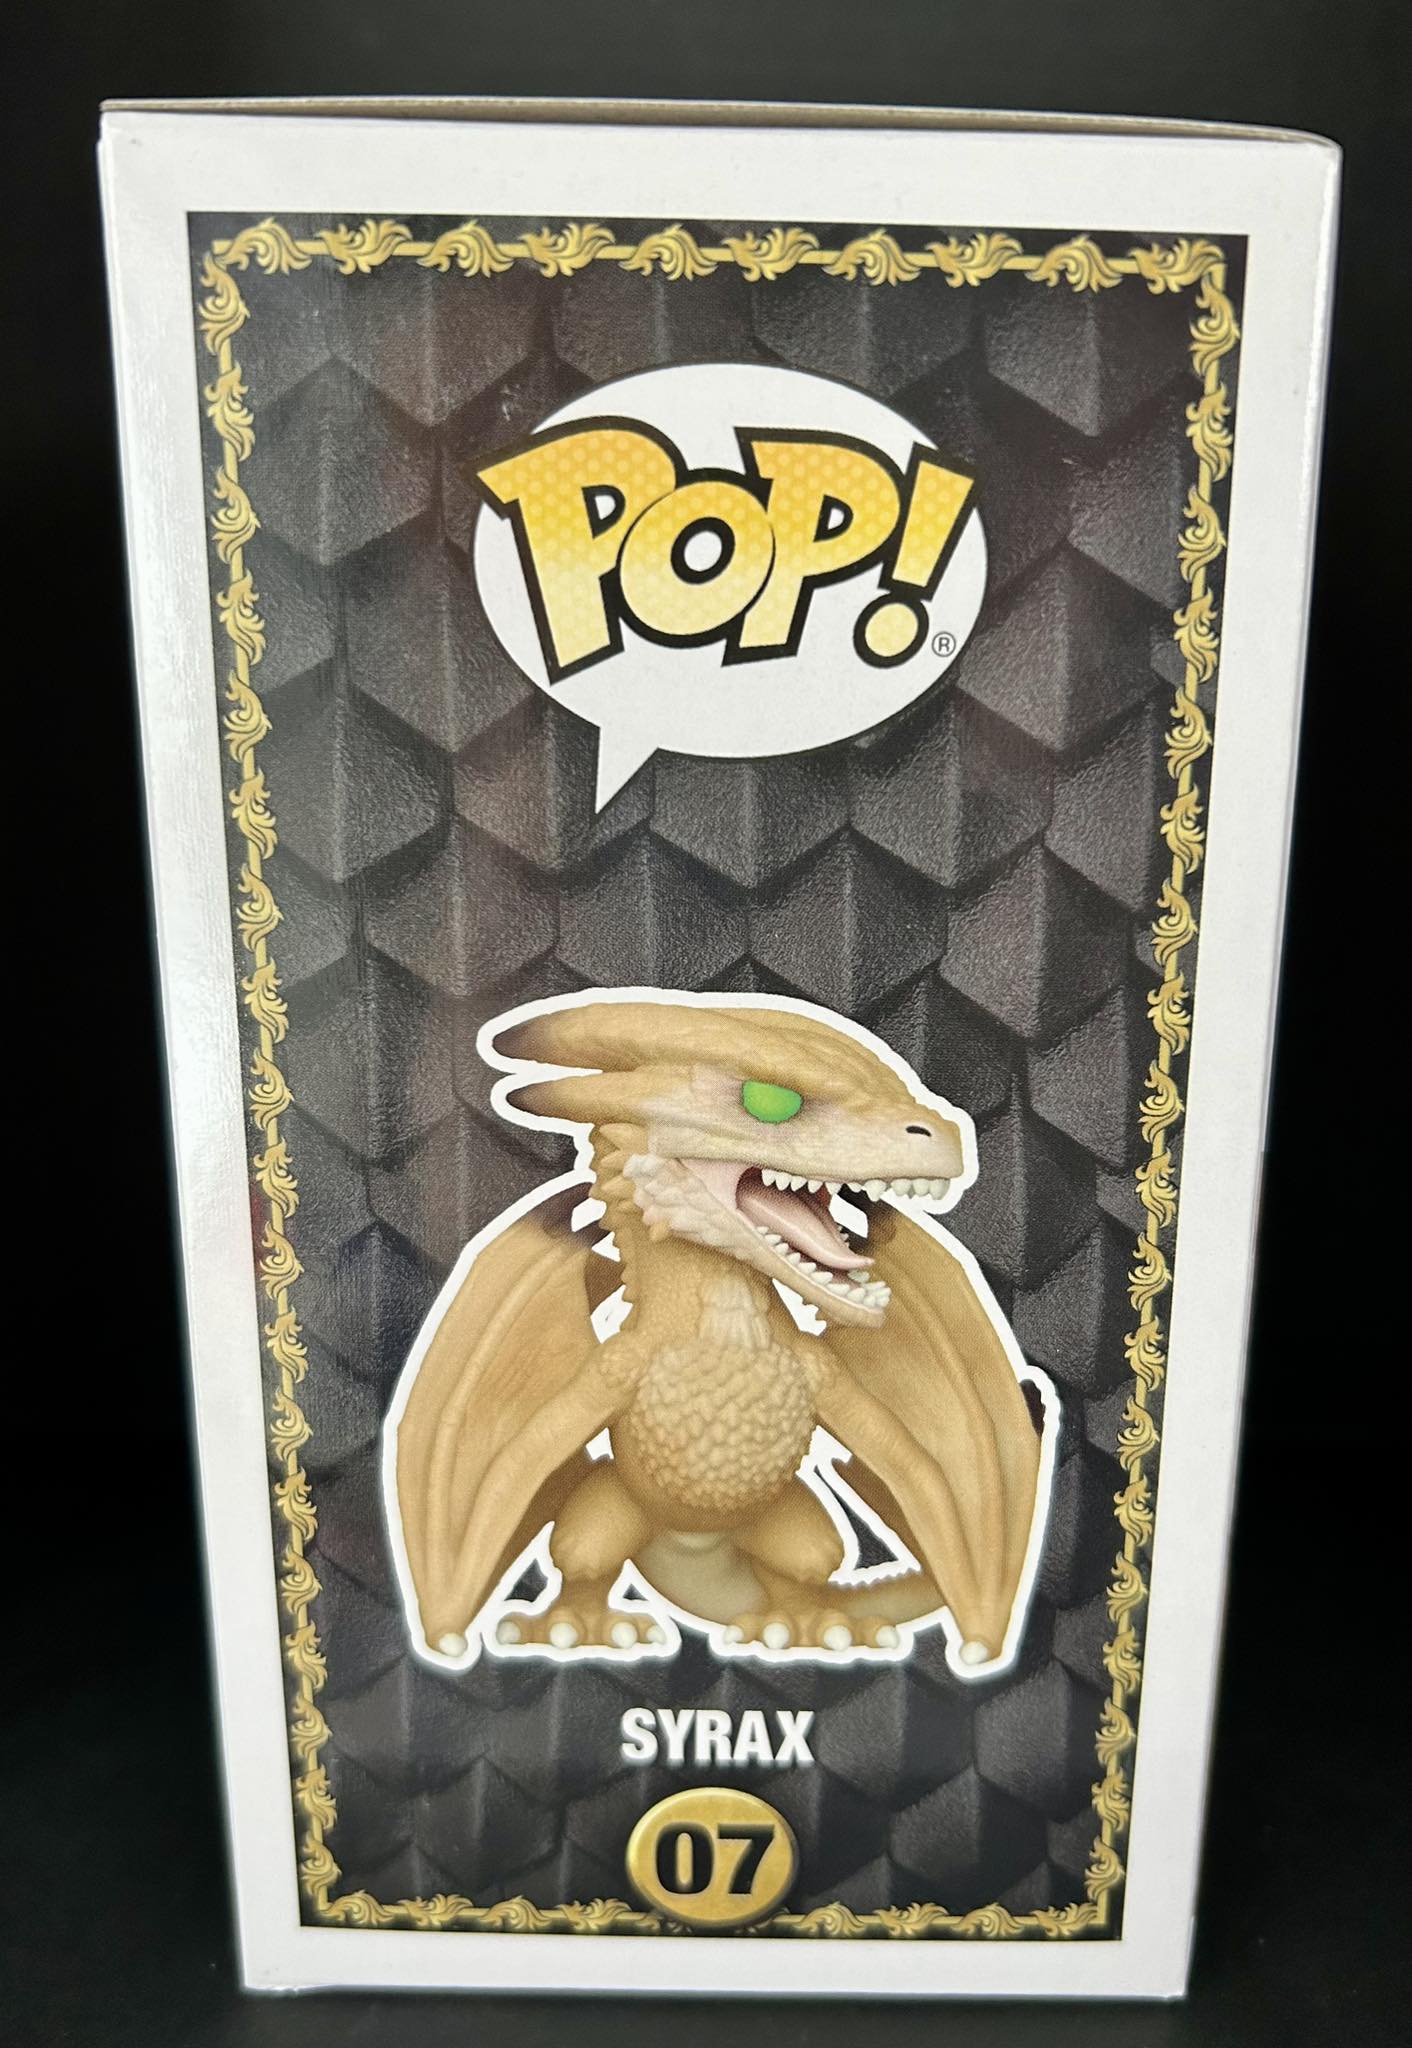 Funko Pop! Game of Thrones: House of the Dragon - Syrax